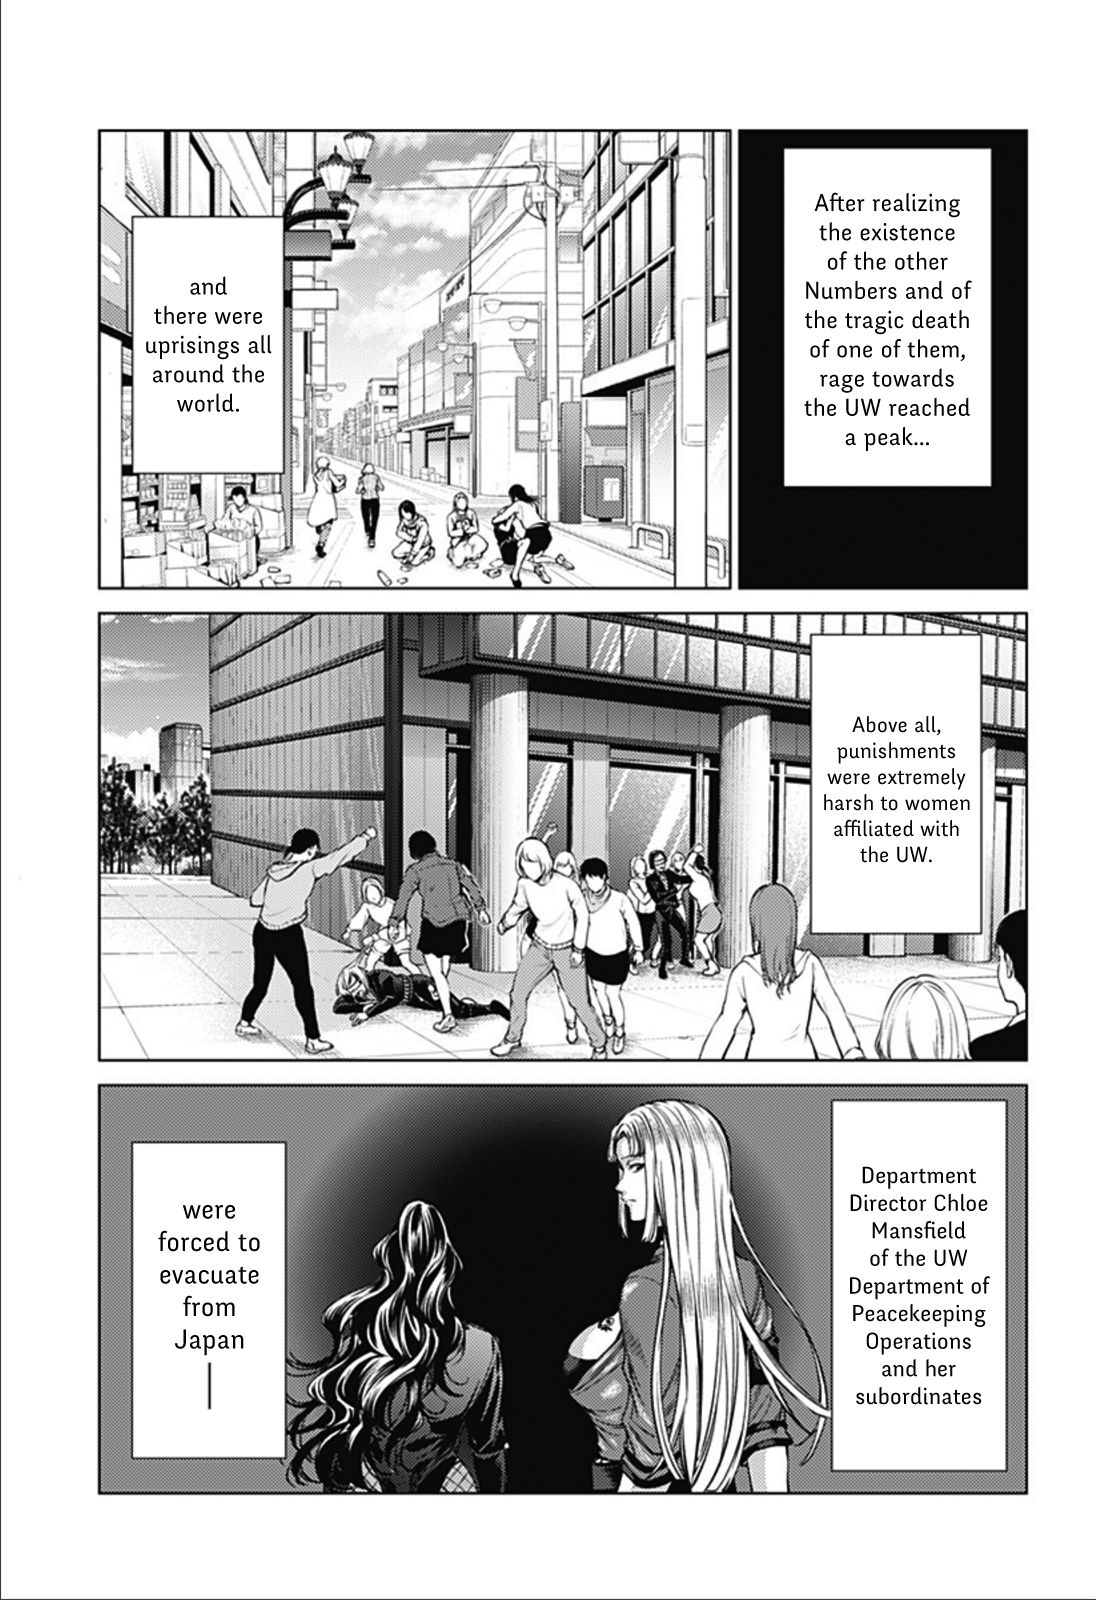 World's End Harem, Chapter 85  TcbScans Net - TCBscans - Free Manga Online  in High Quality